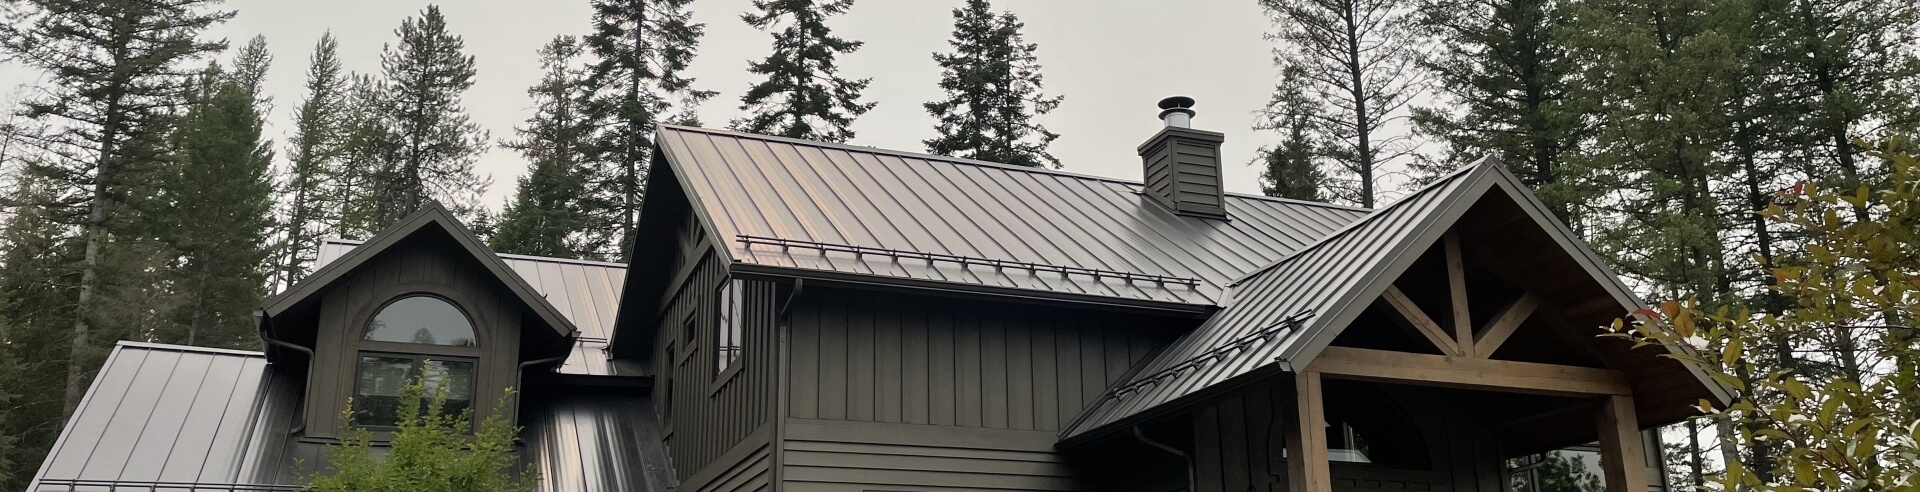 Metal Roof in Flathead Valley courtesy of Titan Roofing.